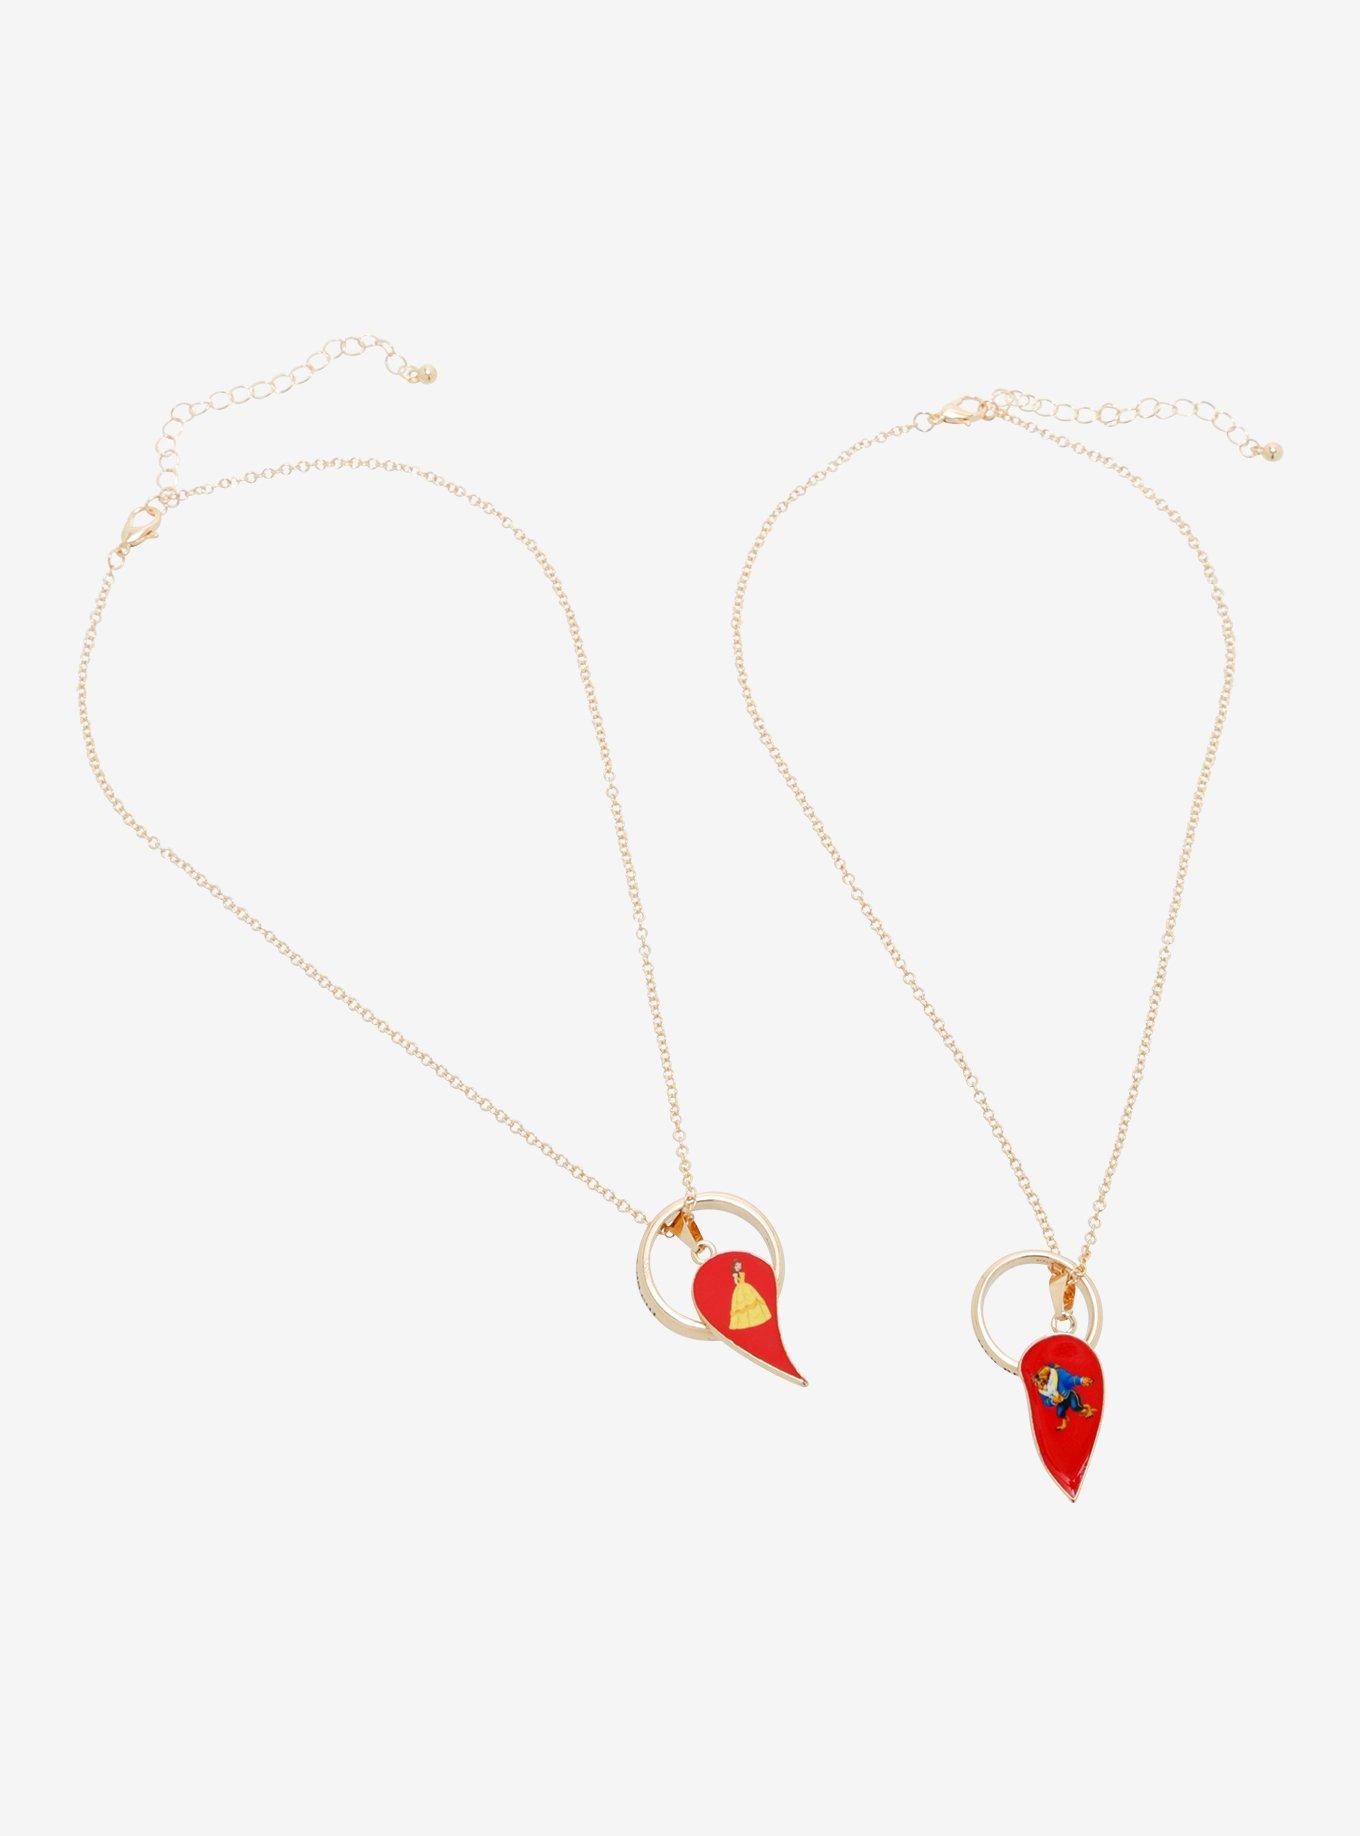 Disney Beauty And The Best Heart Ring Necklace Set